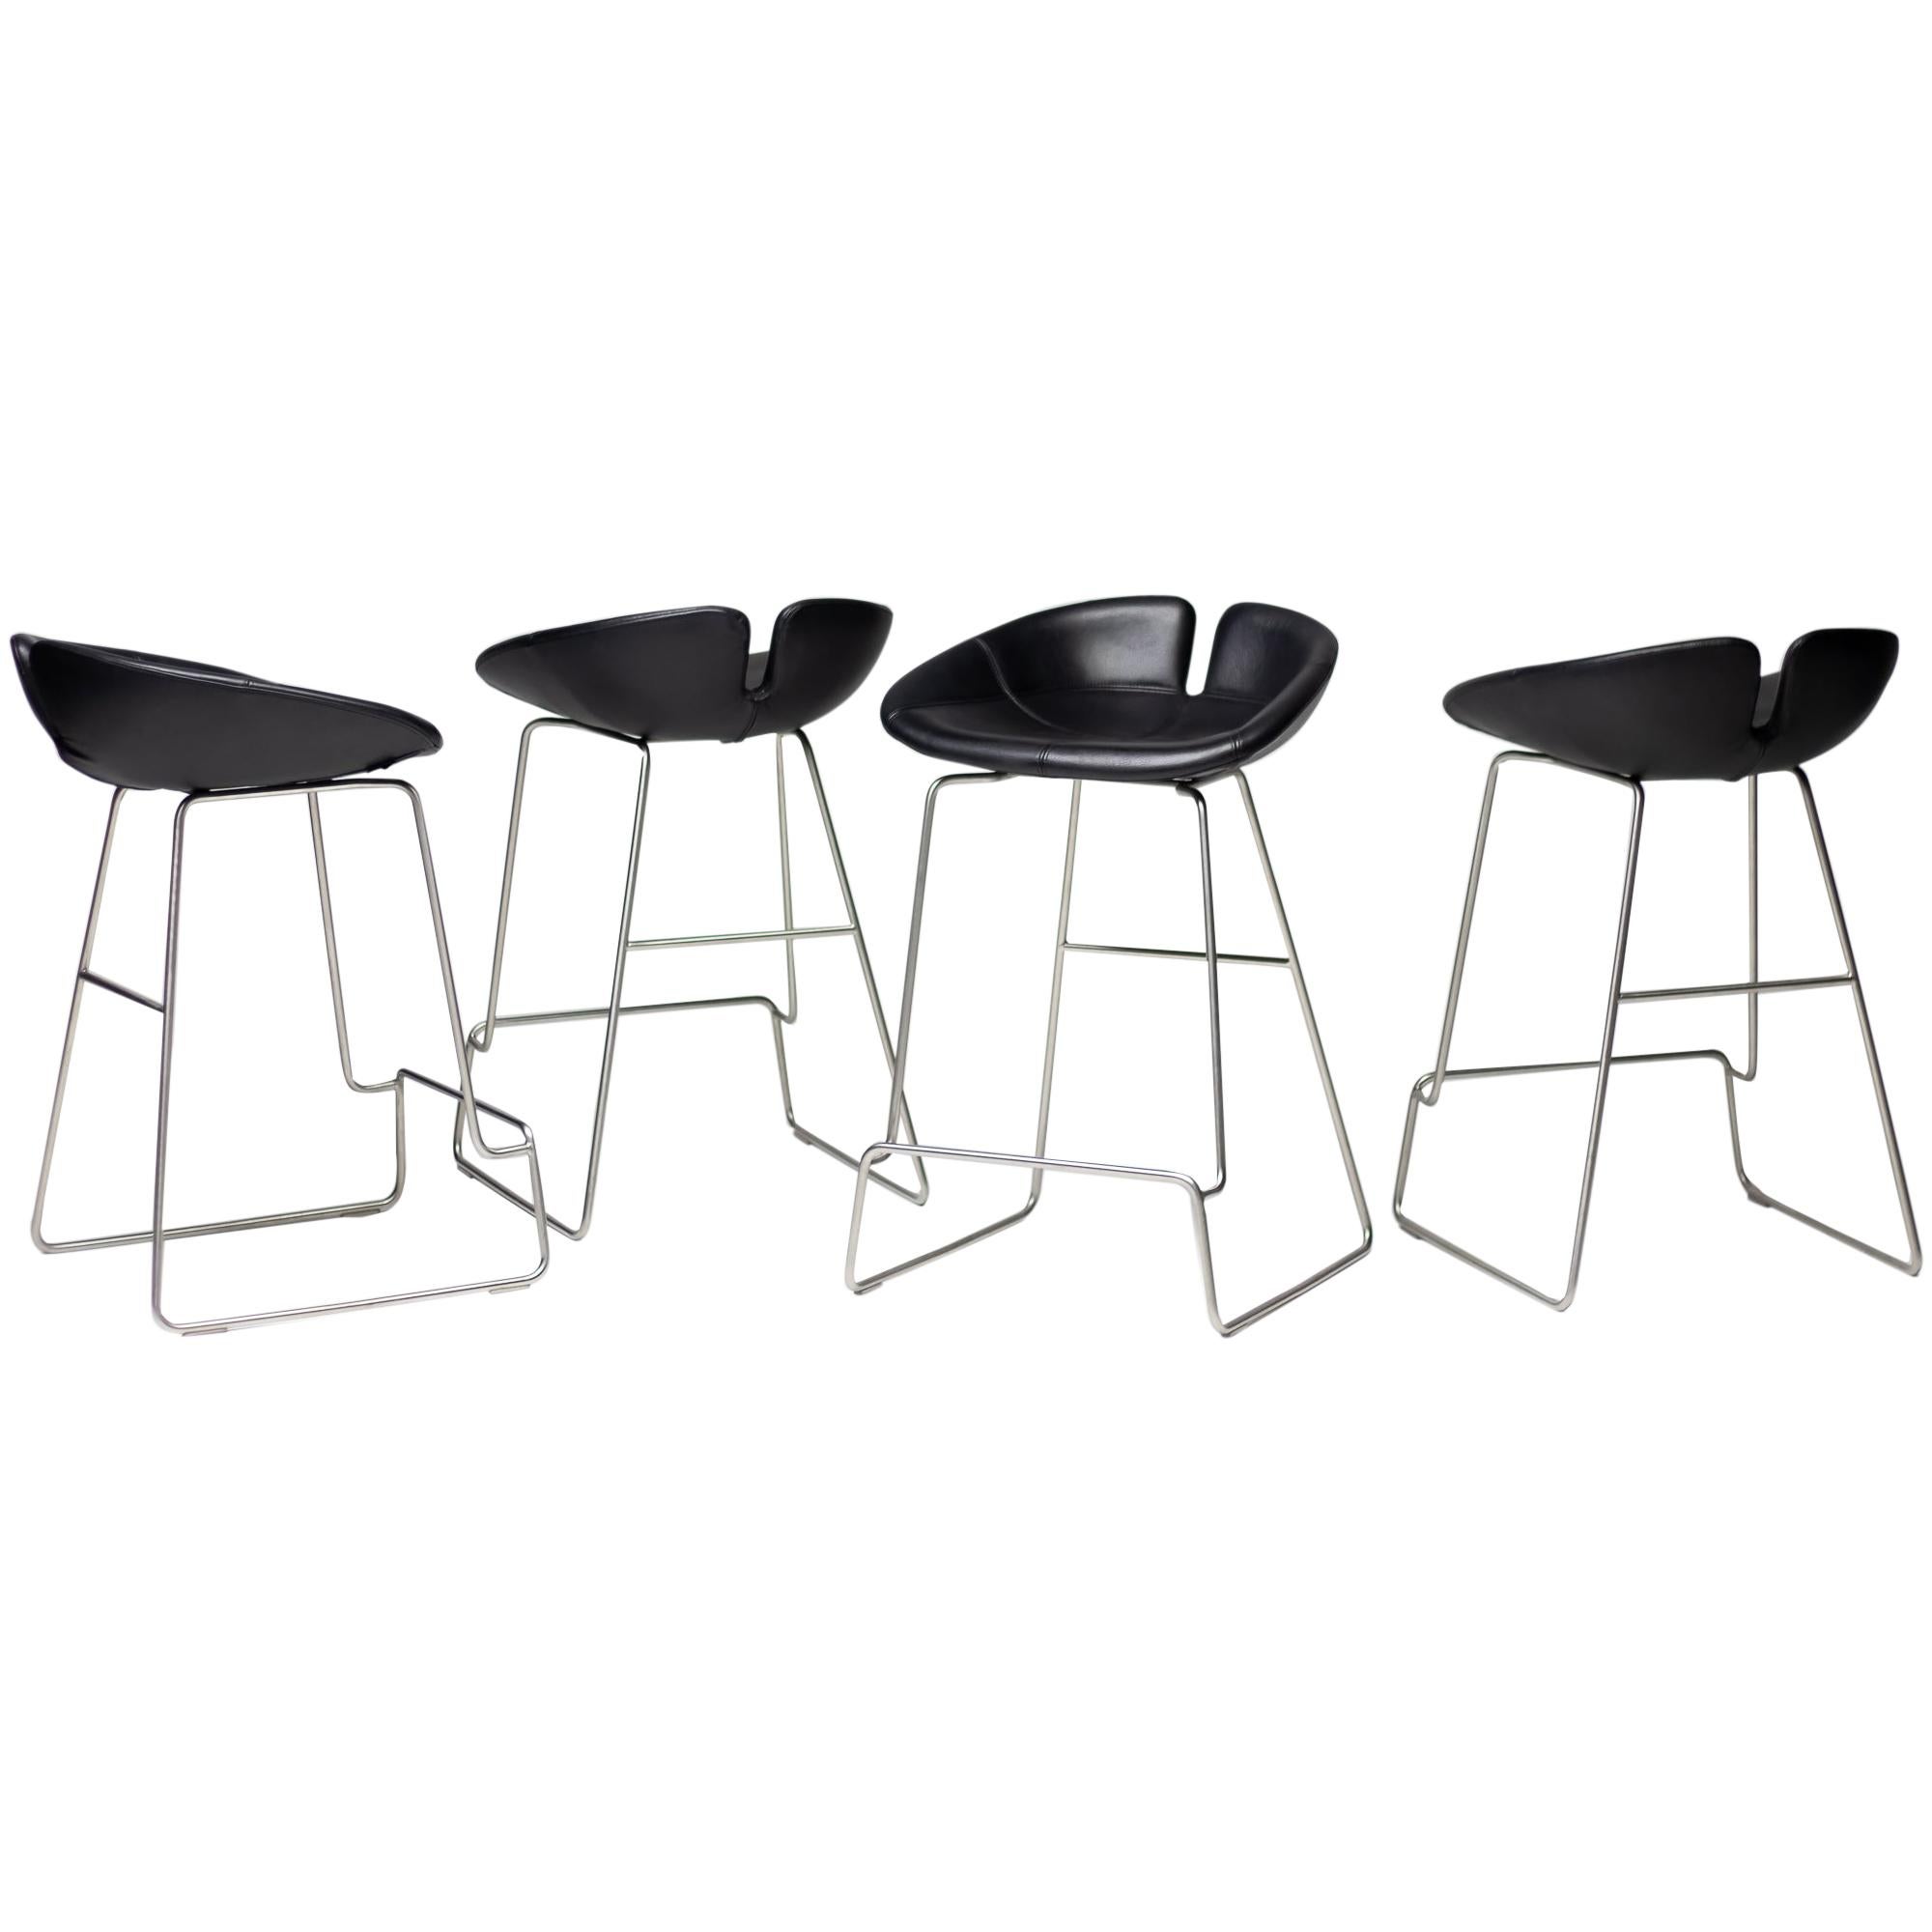 Fjord Black Leather Bar Stools by Patricia Urquiola